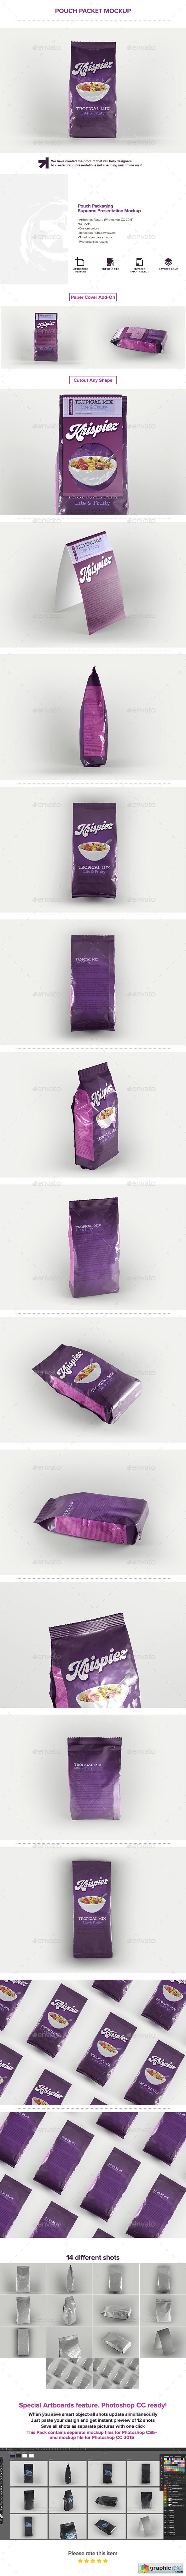 Pouch Packet Packaging Mockup